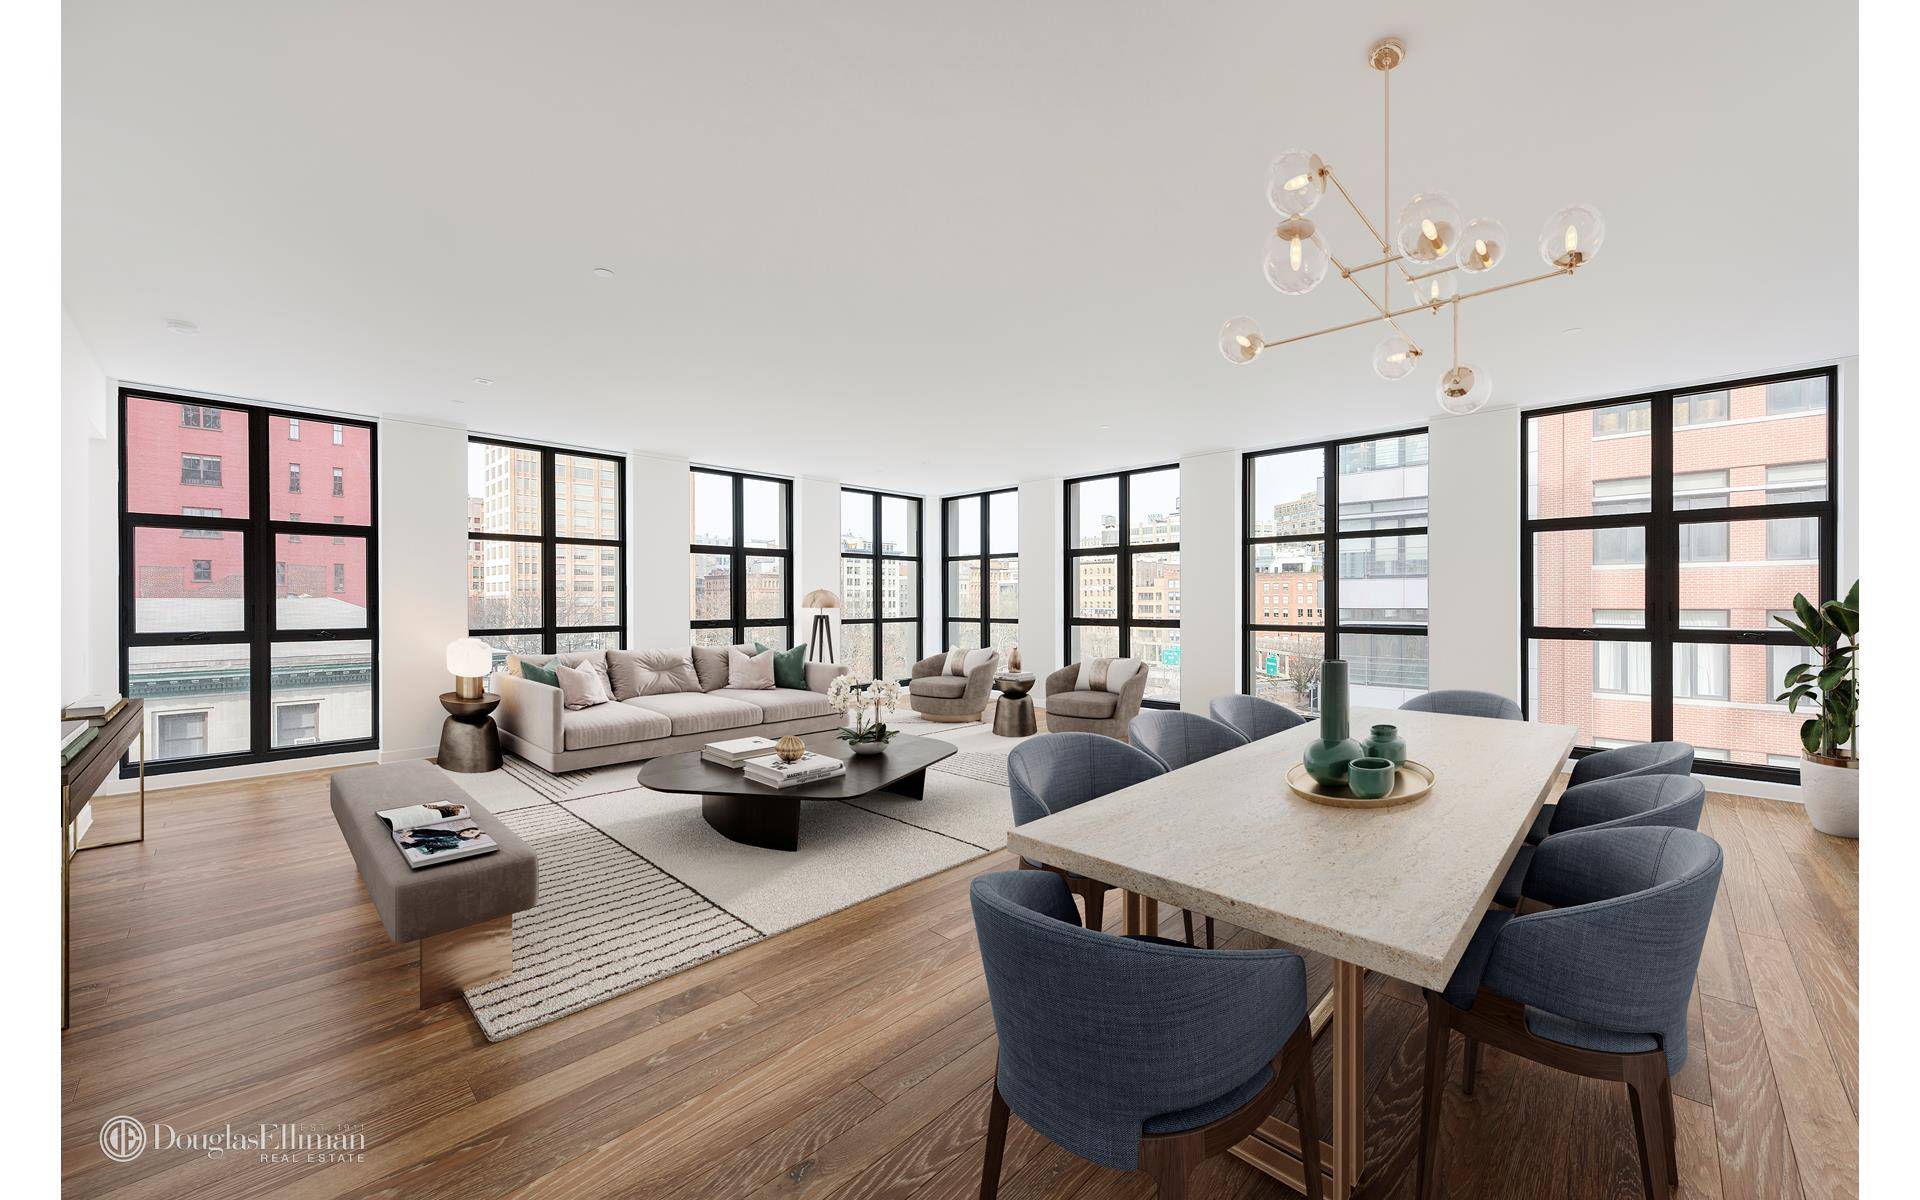 Located in the heart of Tribeca, the brand new 11 North Moore Condominium offers loft like living through dramatic floor to ceiling windows and soaring eleven foot ceilings.